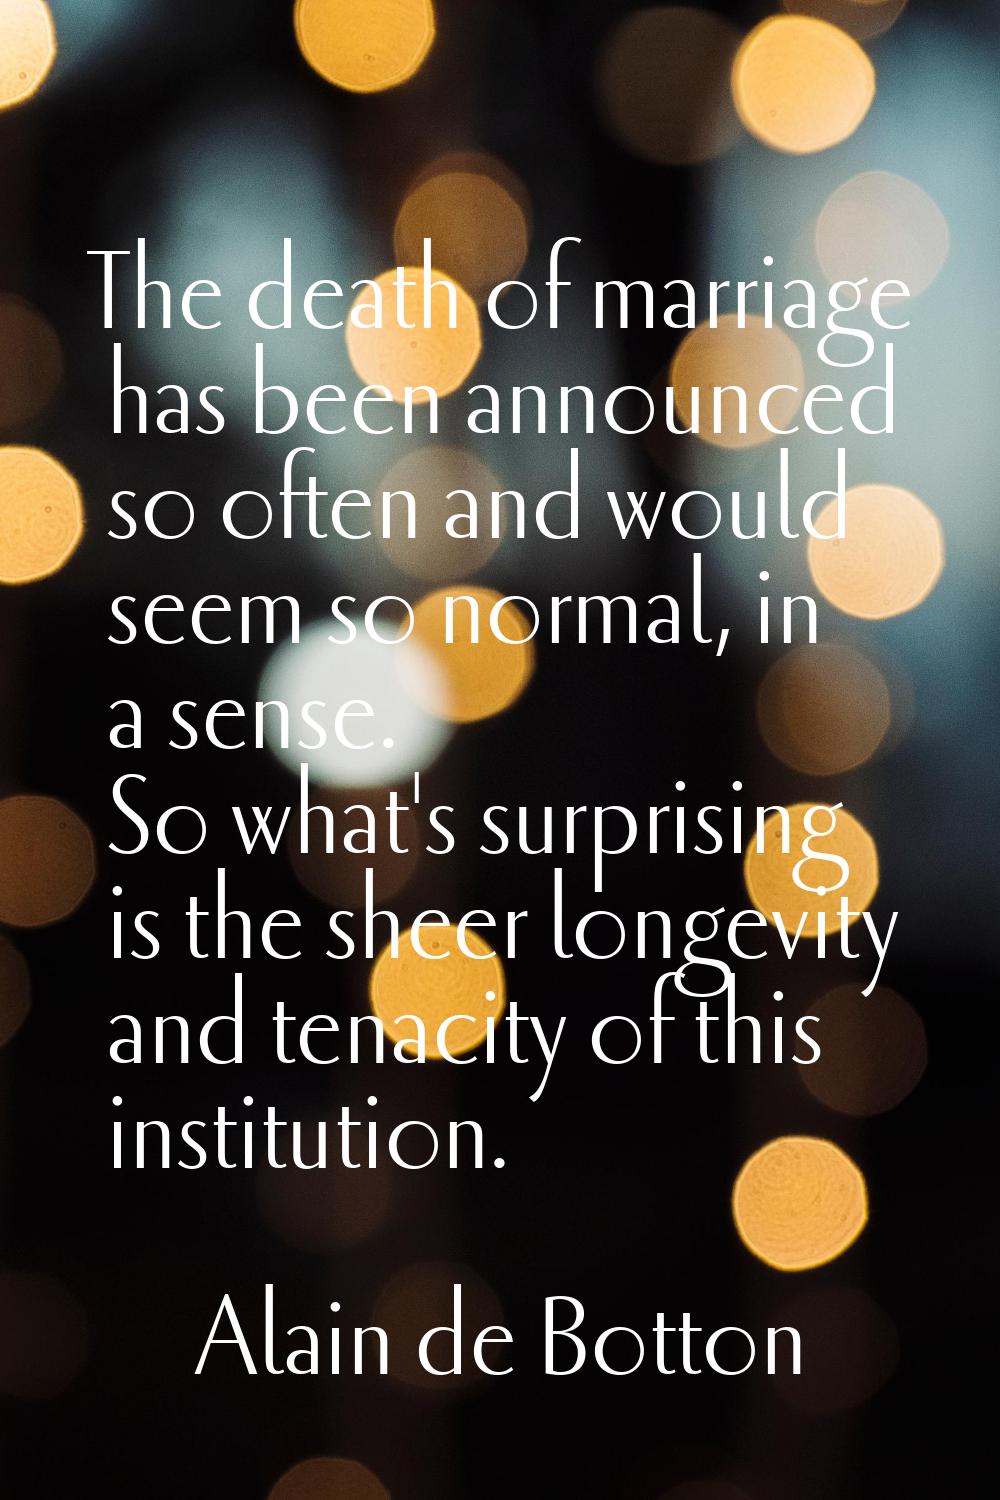 The death of marriage has been announced so often and would seem so normal, in a sense. So what's s